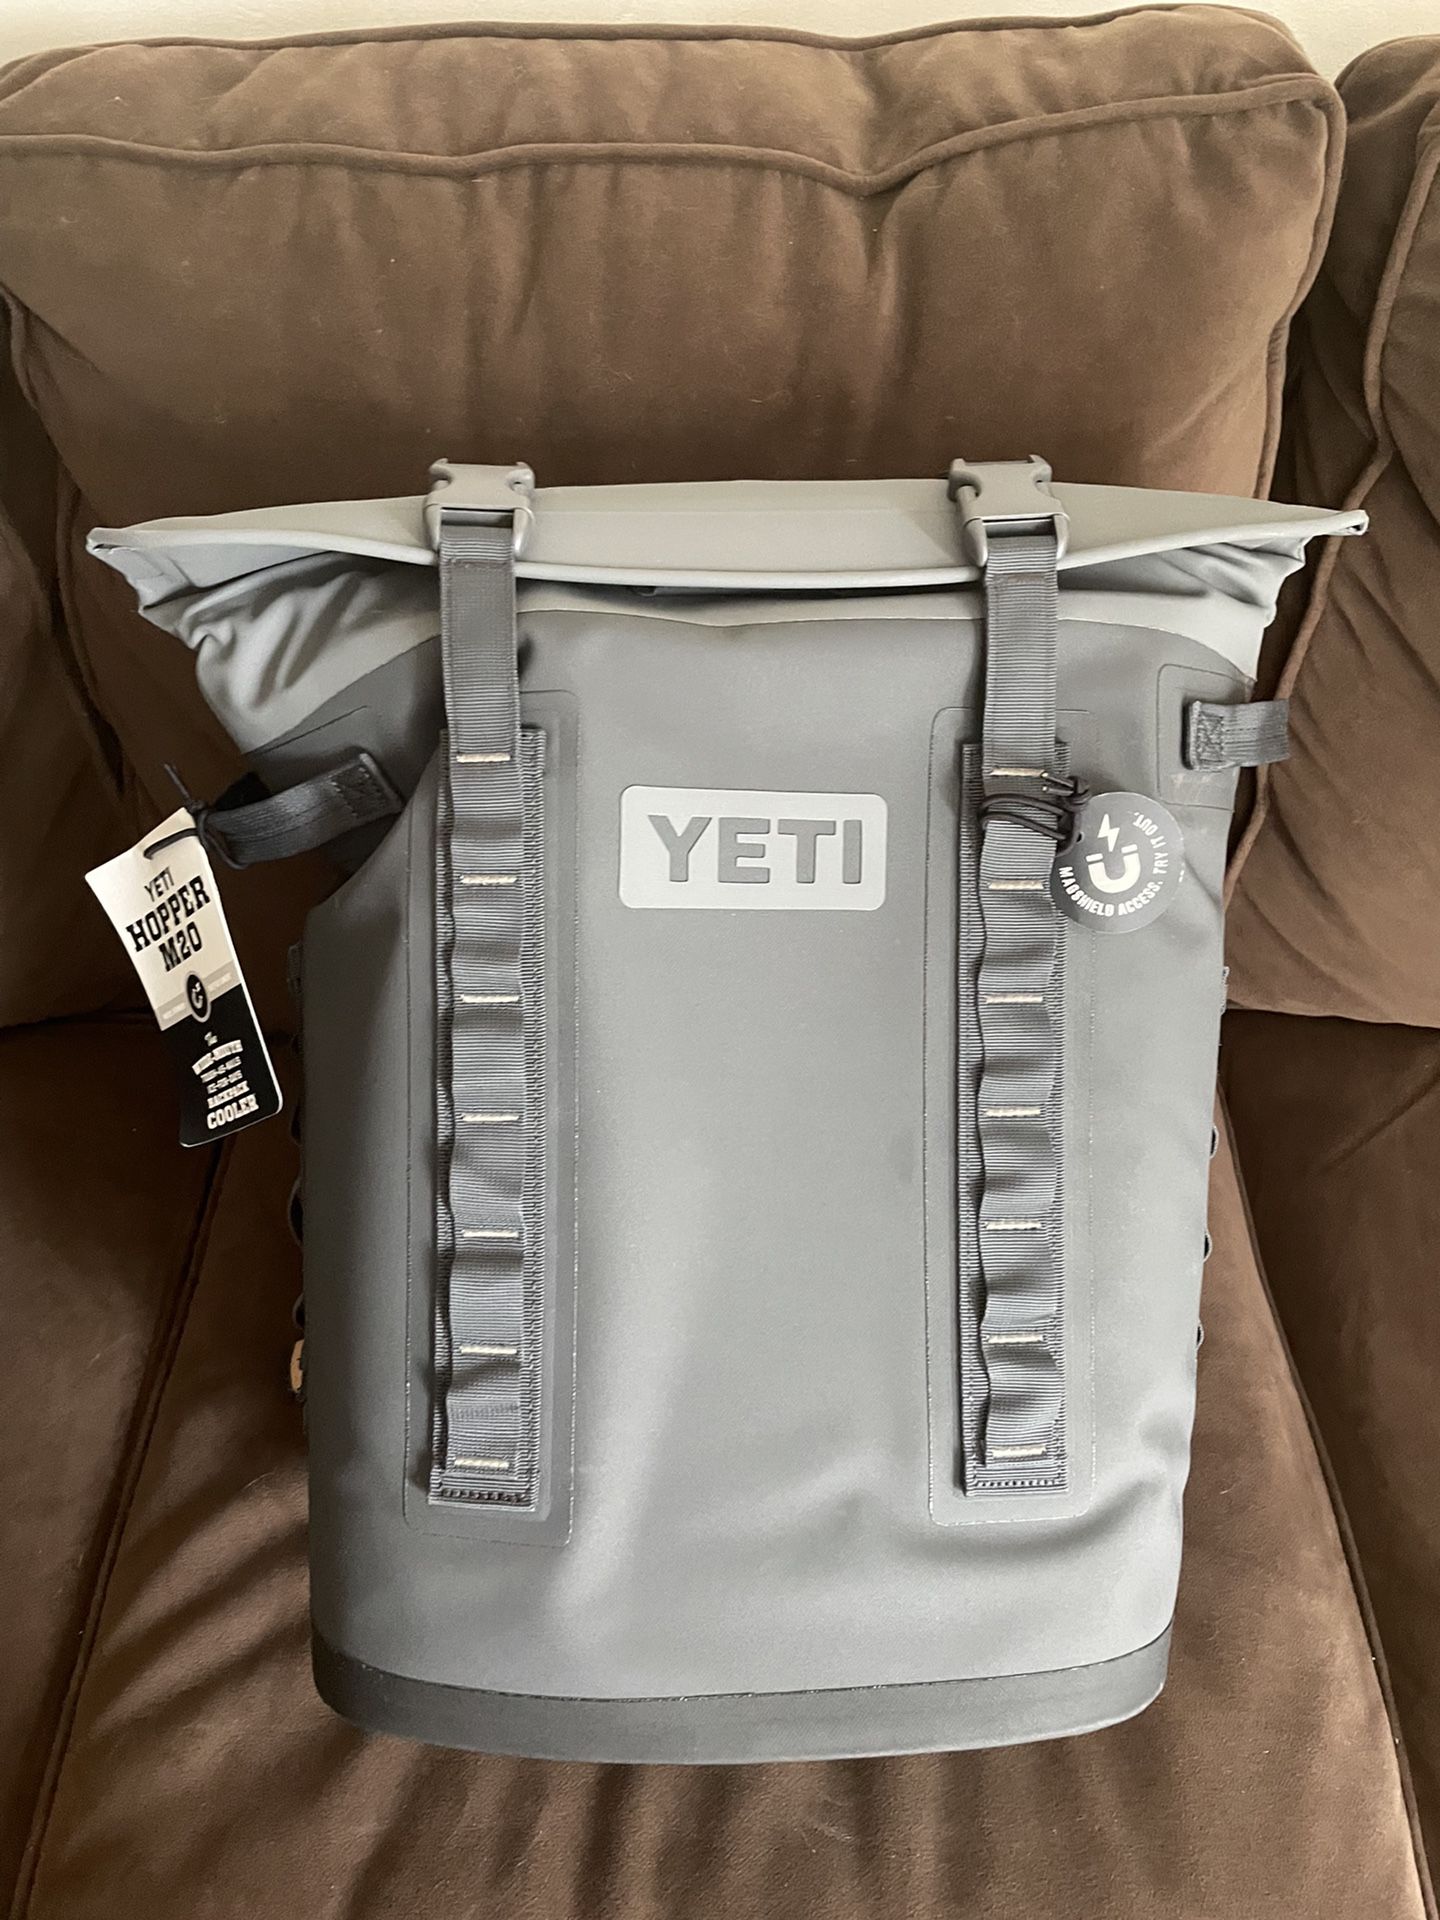 Yeti M20 canopy green with matching sidekick, RARE! - general for sale - by  owner - craigslist